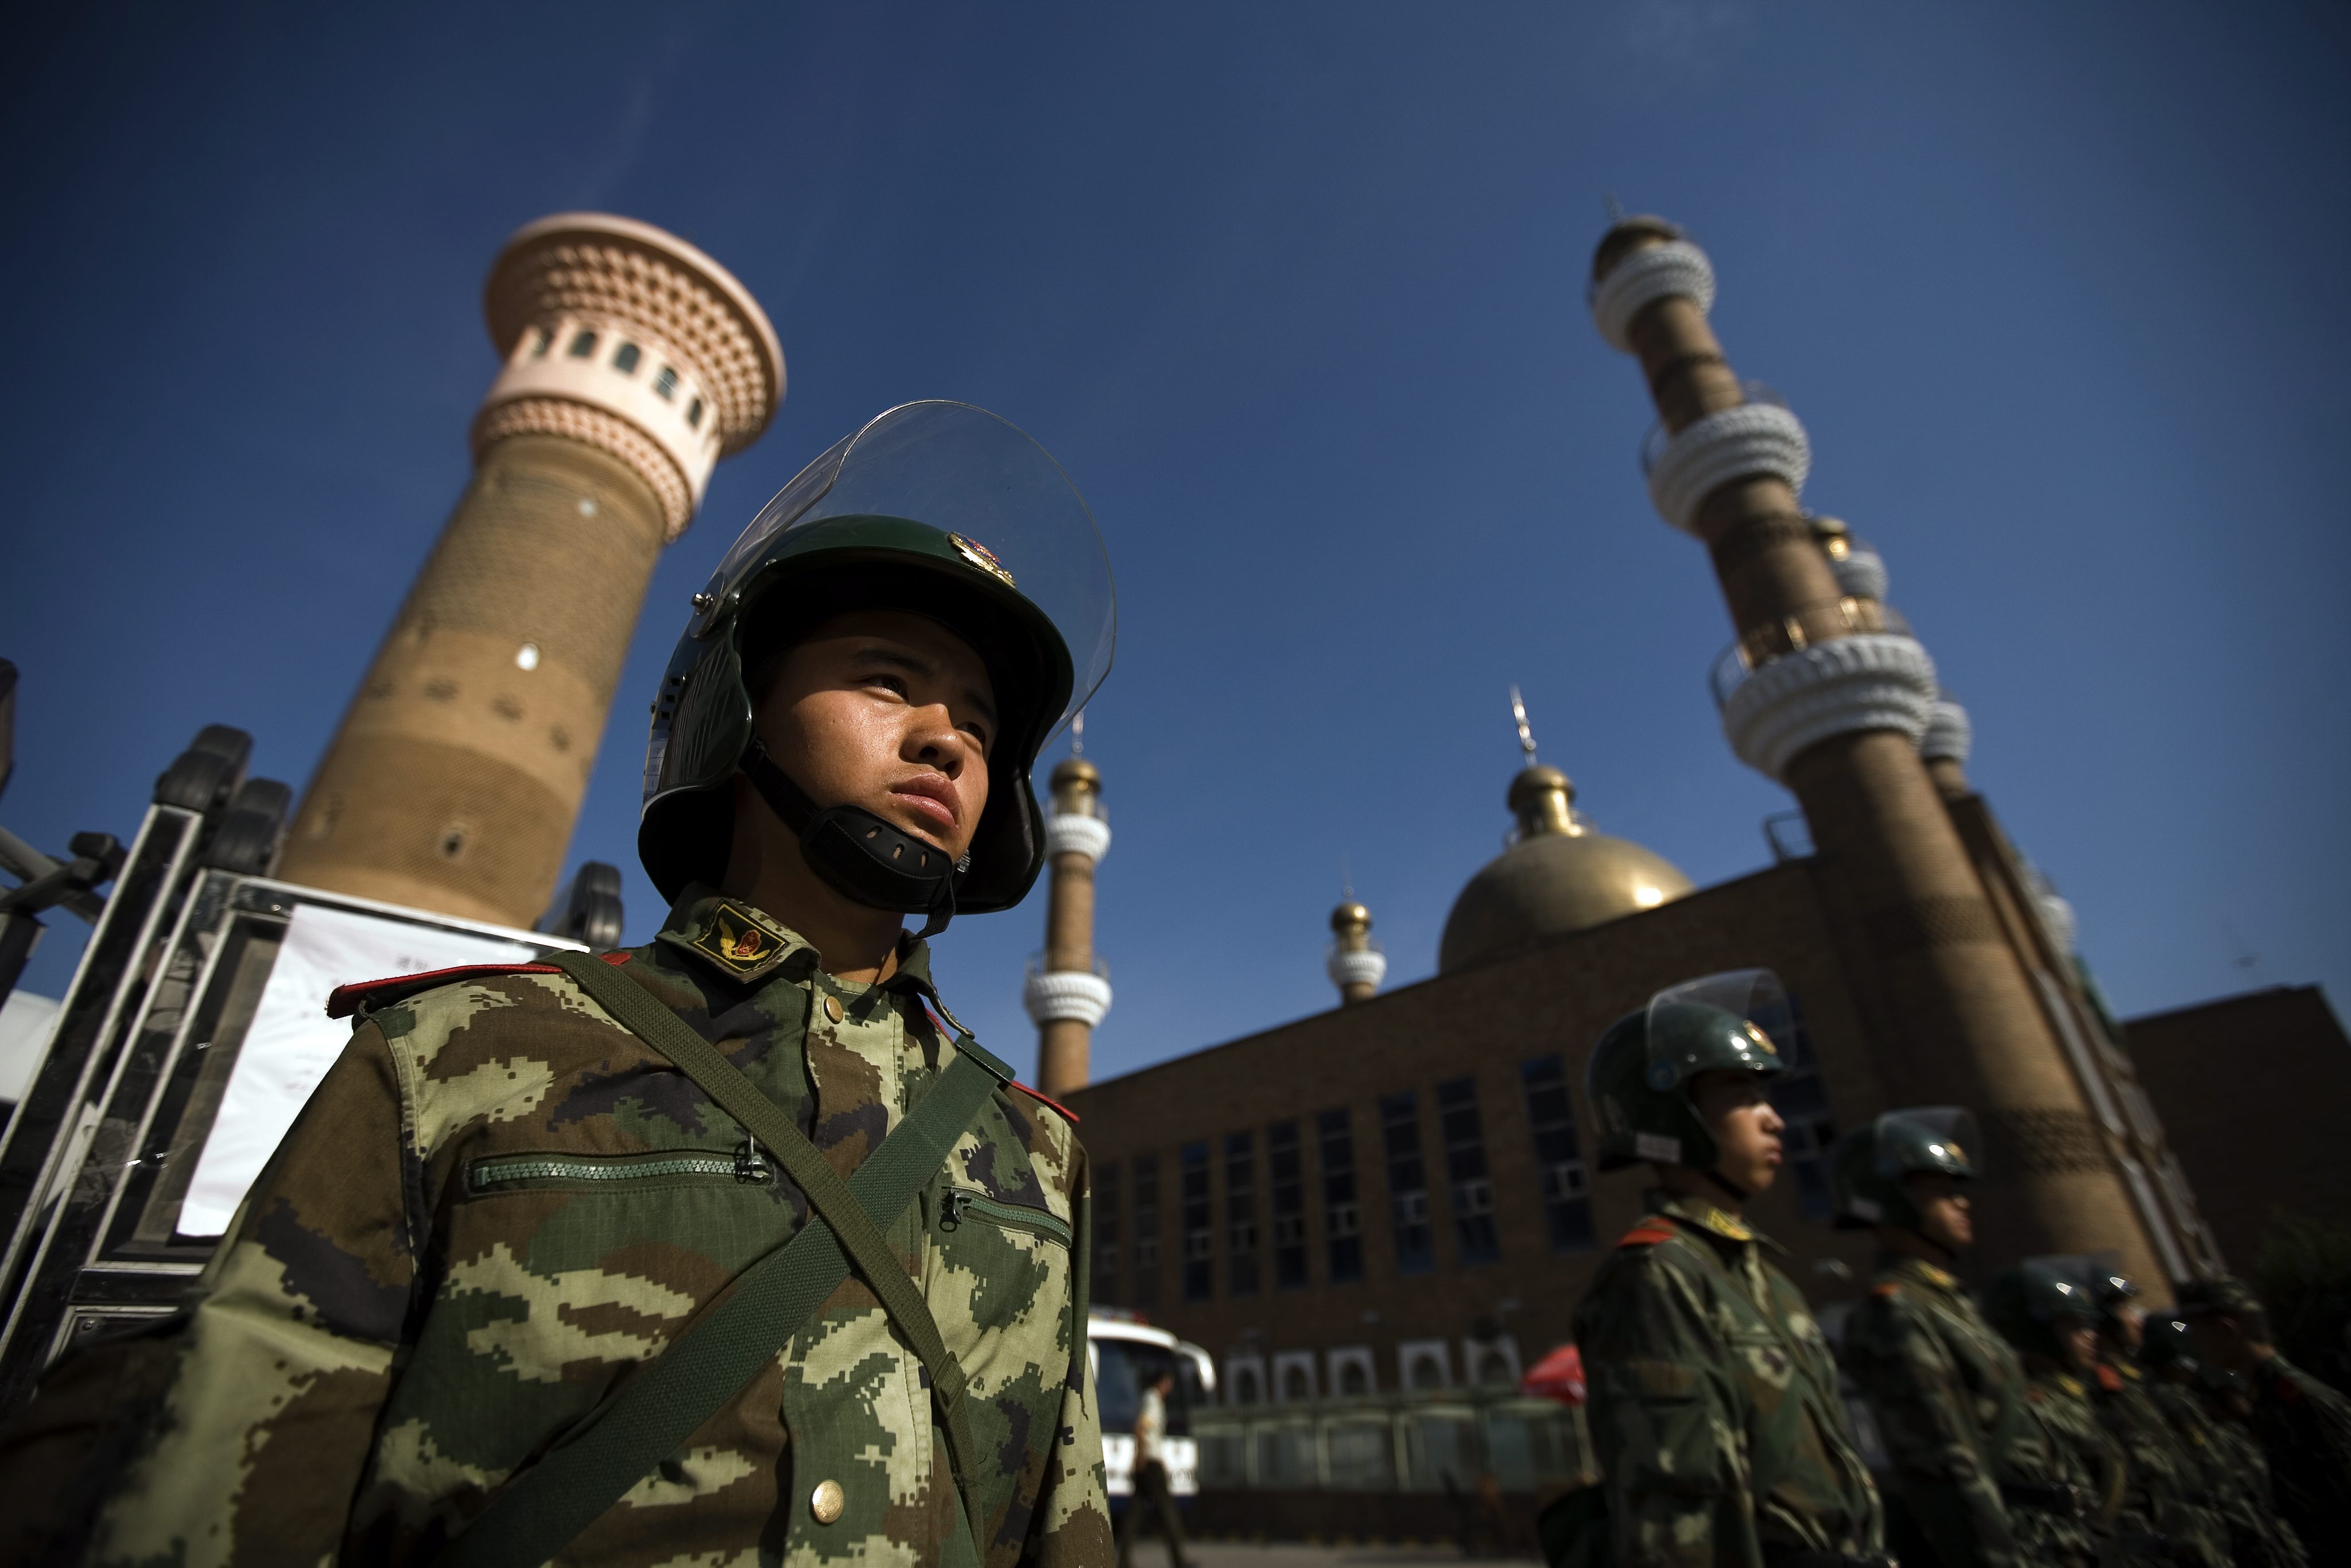 Islam, Ethnicity, and State Control in China